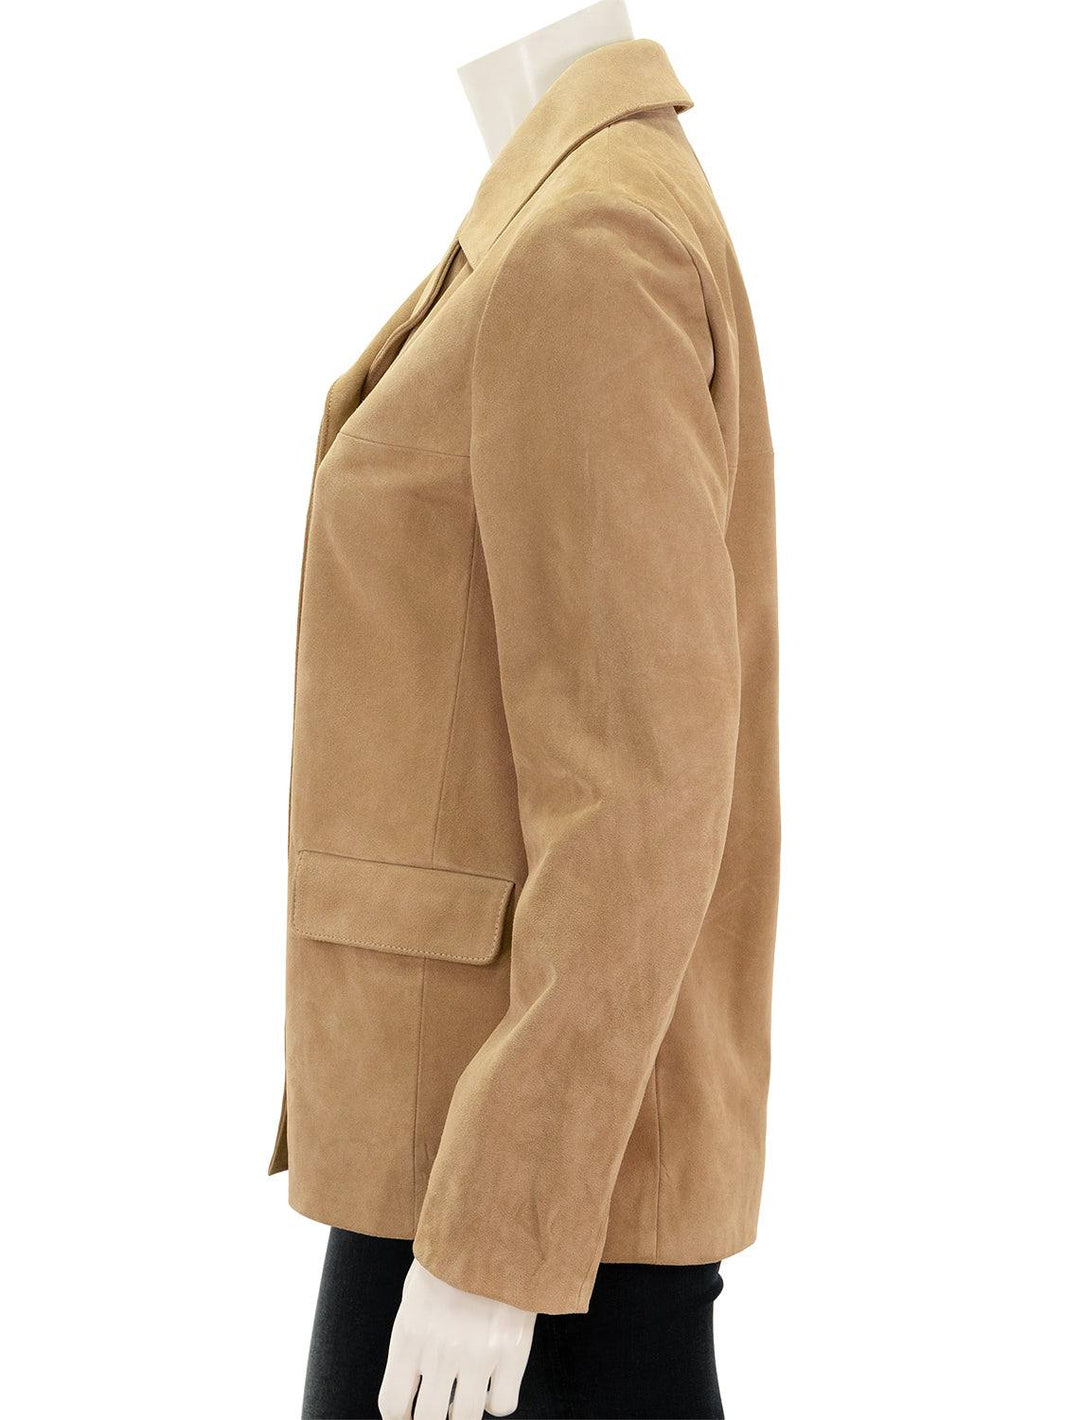 Side view of Nili Lotan's claude suede jacket.